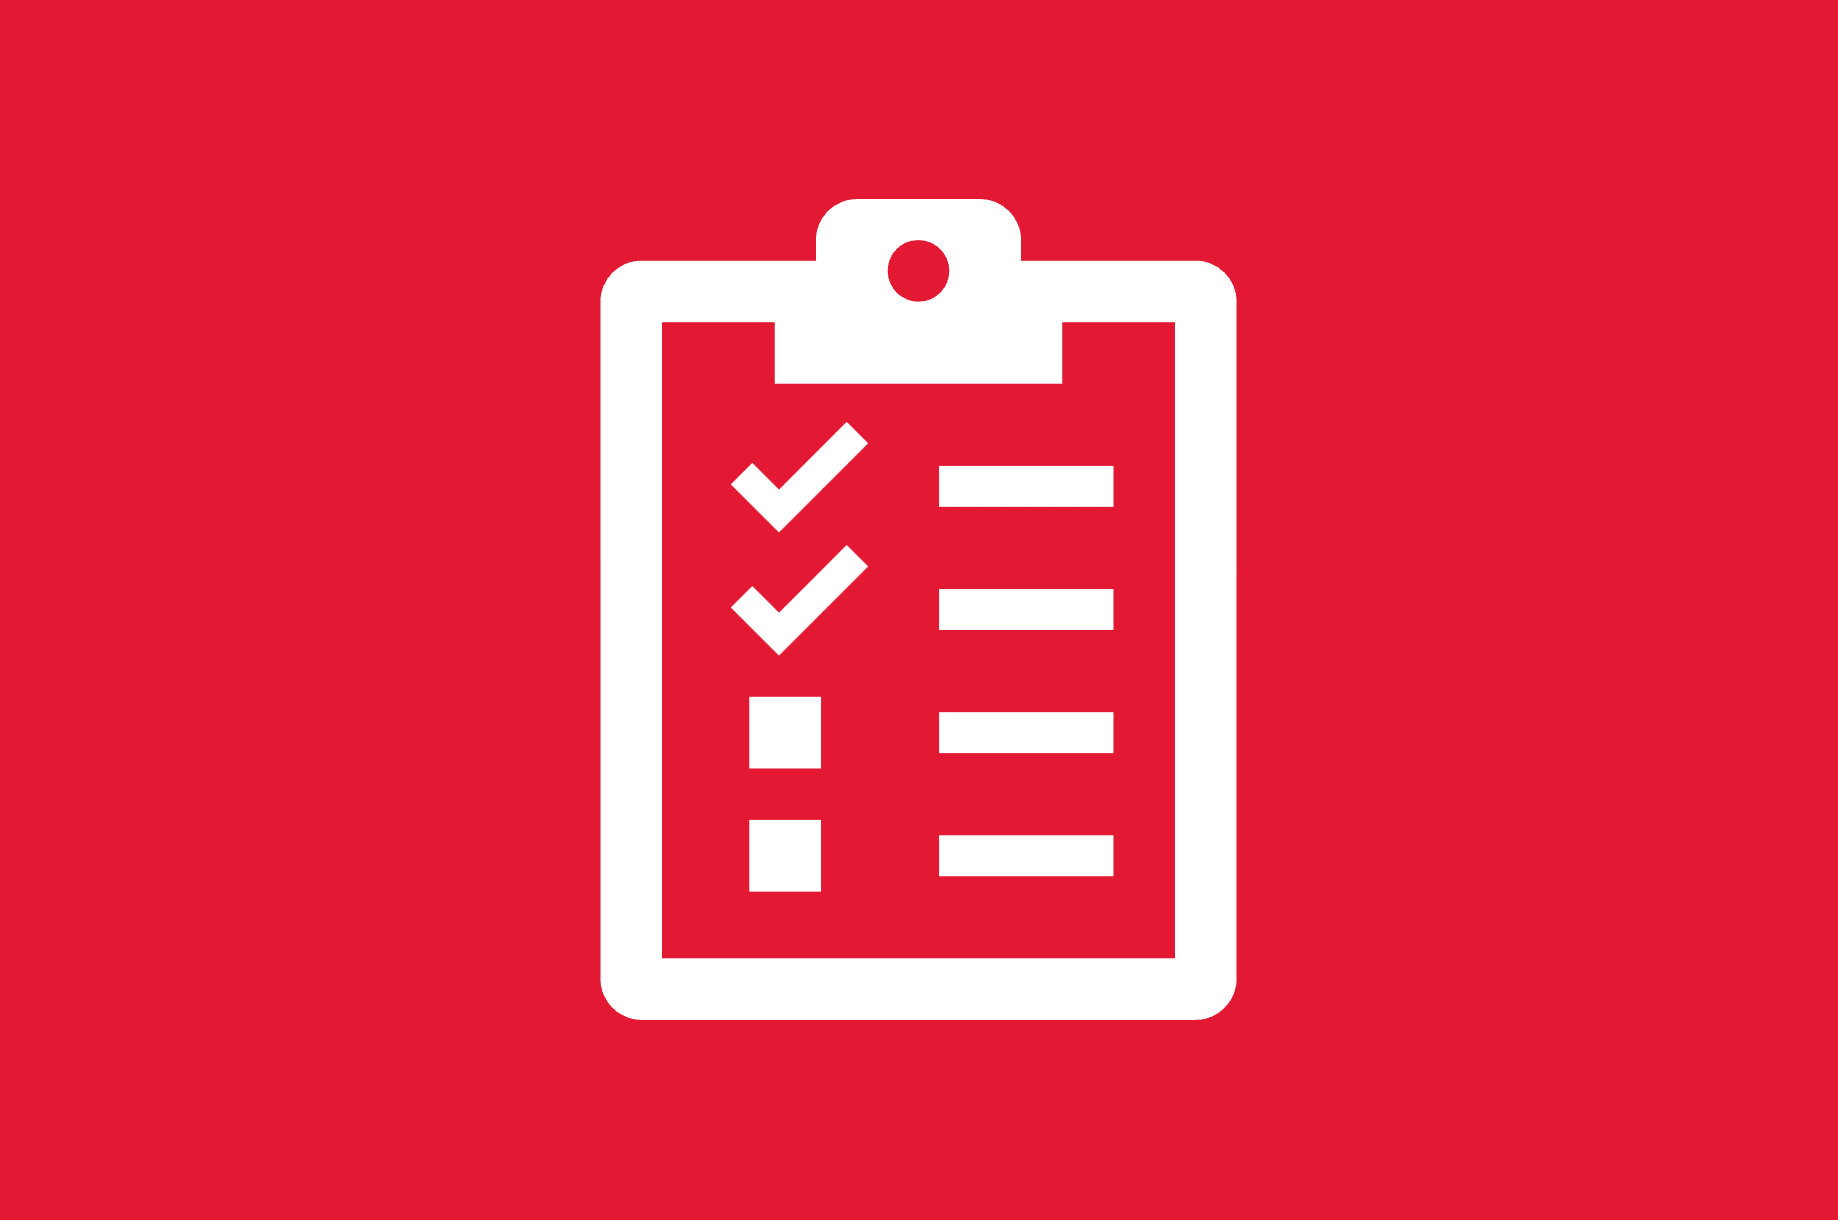 Icon of a half-completed checklist on a clipboard. White icon on red background.